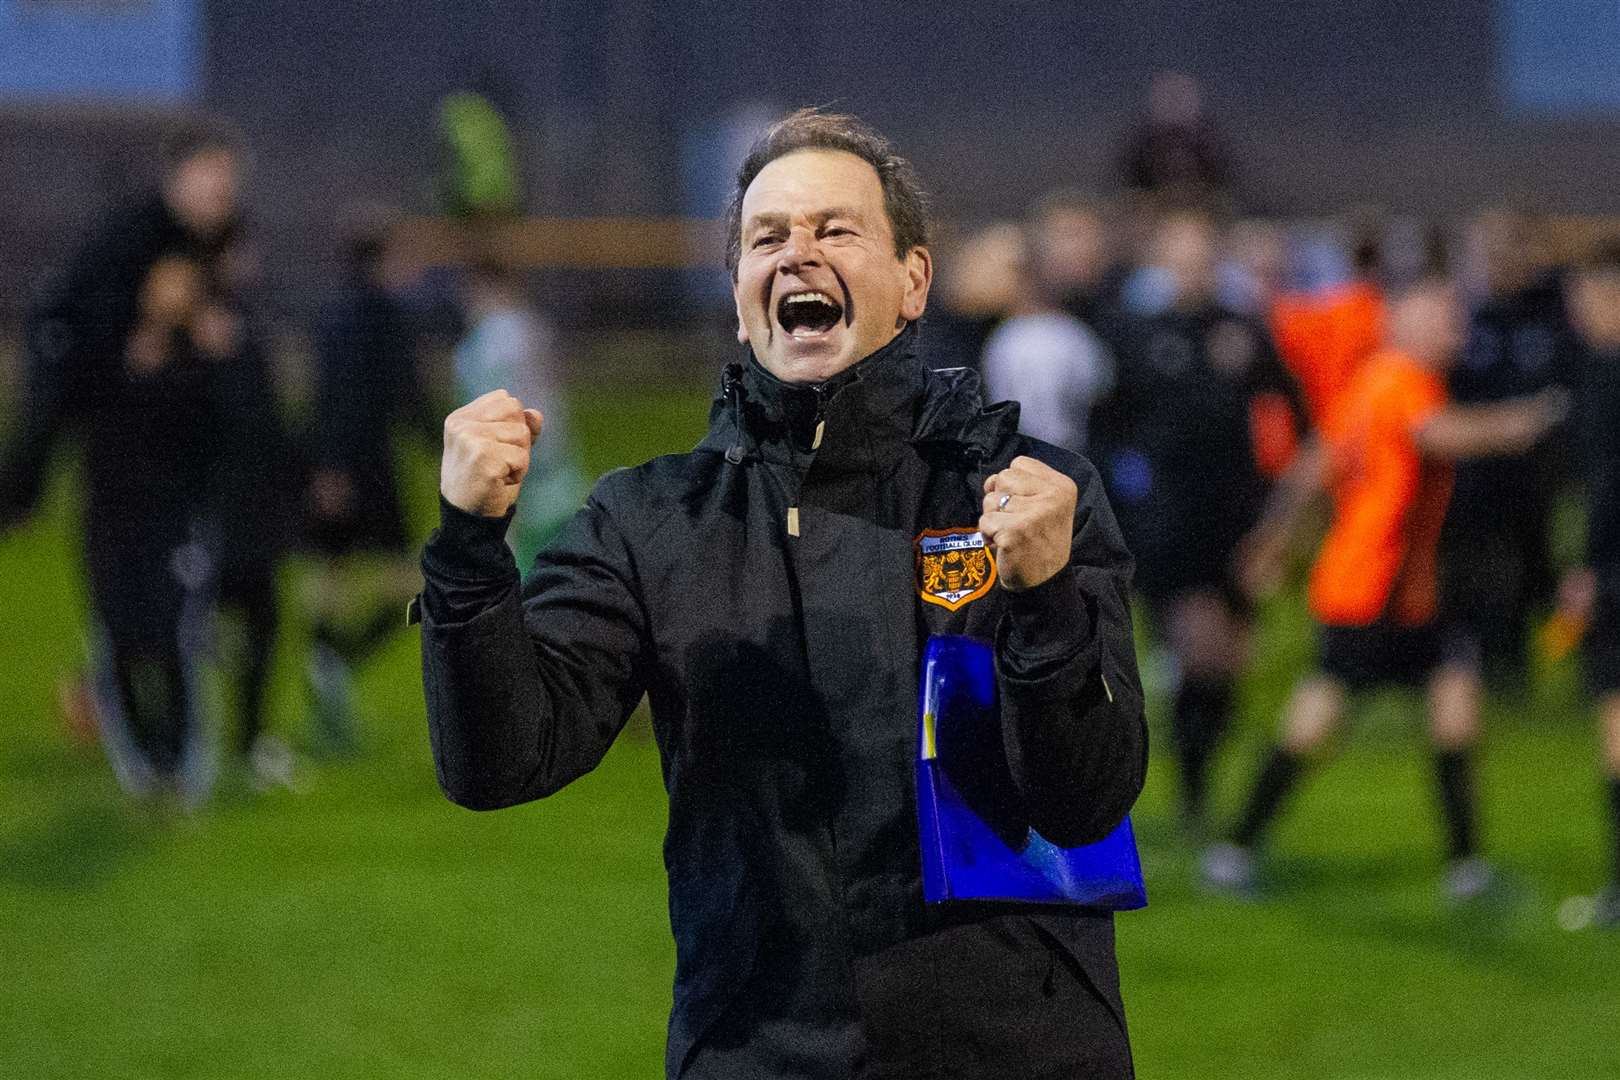 Rothes FC manager Ross Jack...Rothes FC (2) vs Buckie Thistle FC (1) - Highland League Cup Final - Christie Park, Huntly 31/10/2020...Picture: Daniel Forsyth..